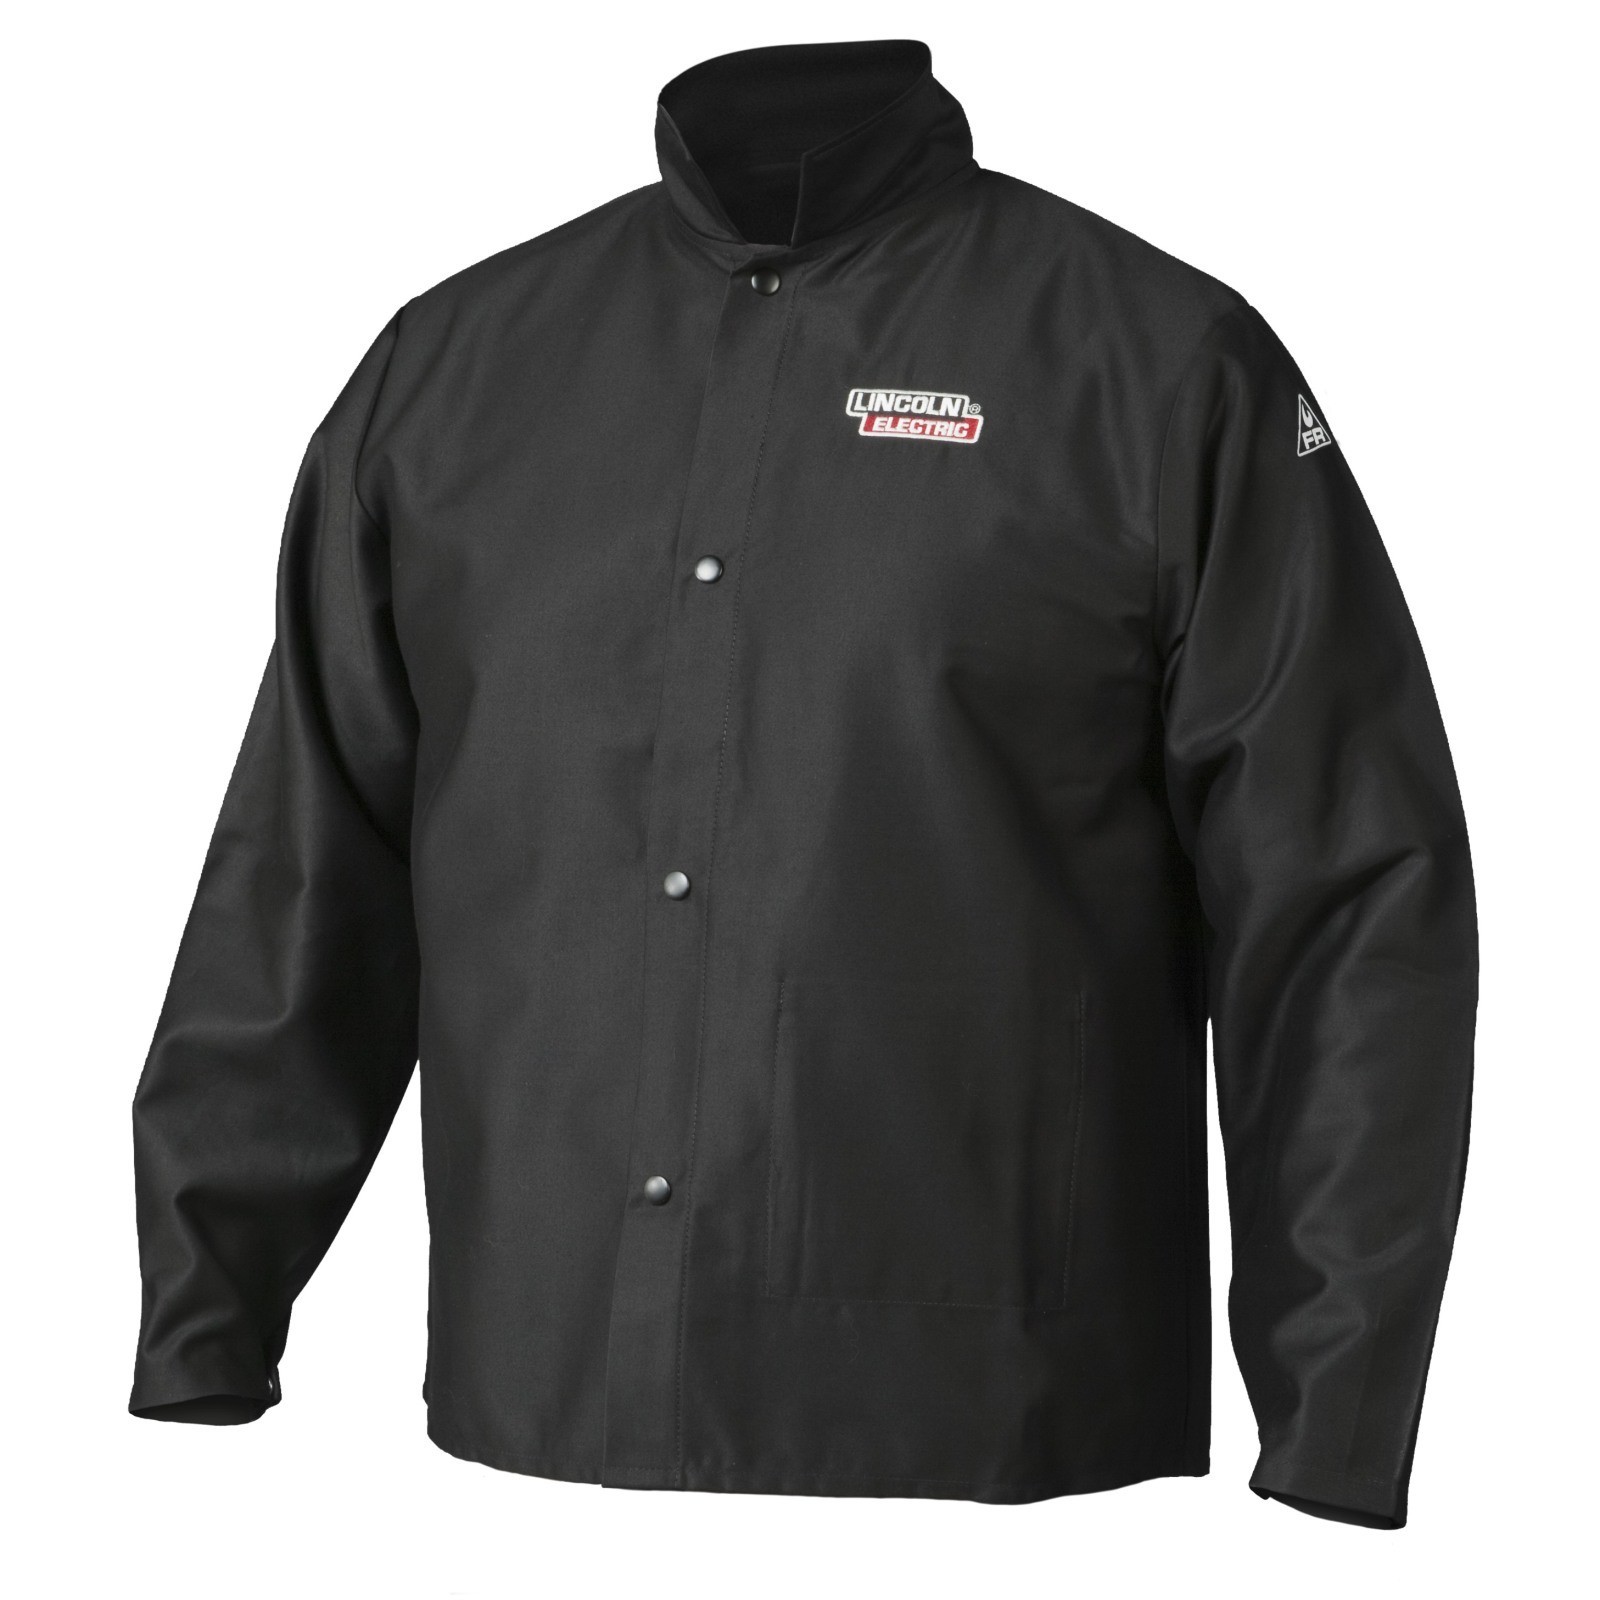 WELDING JACKETS B OTHER (20)